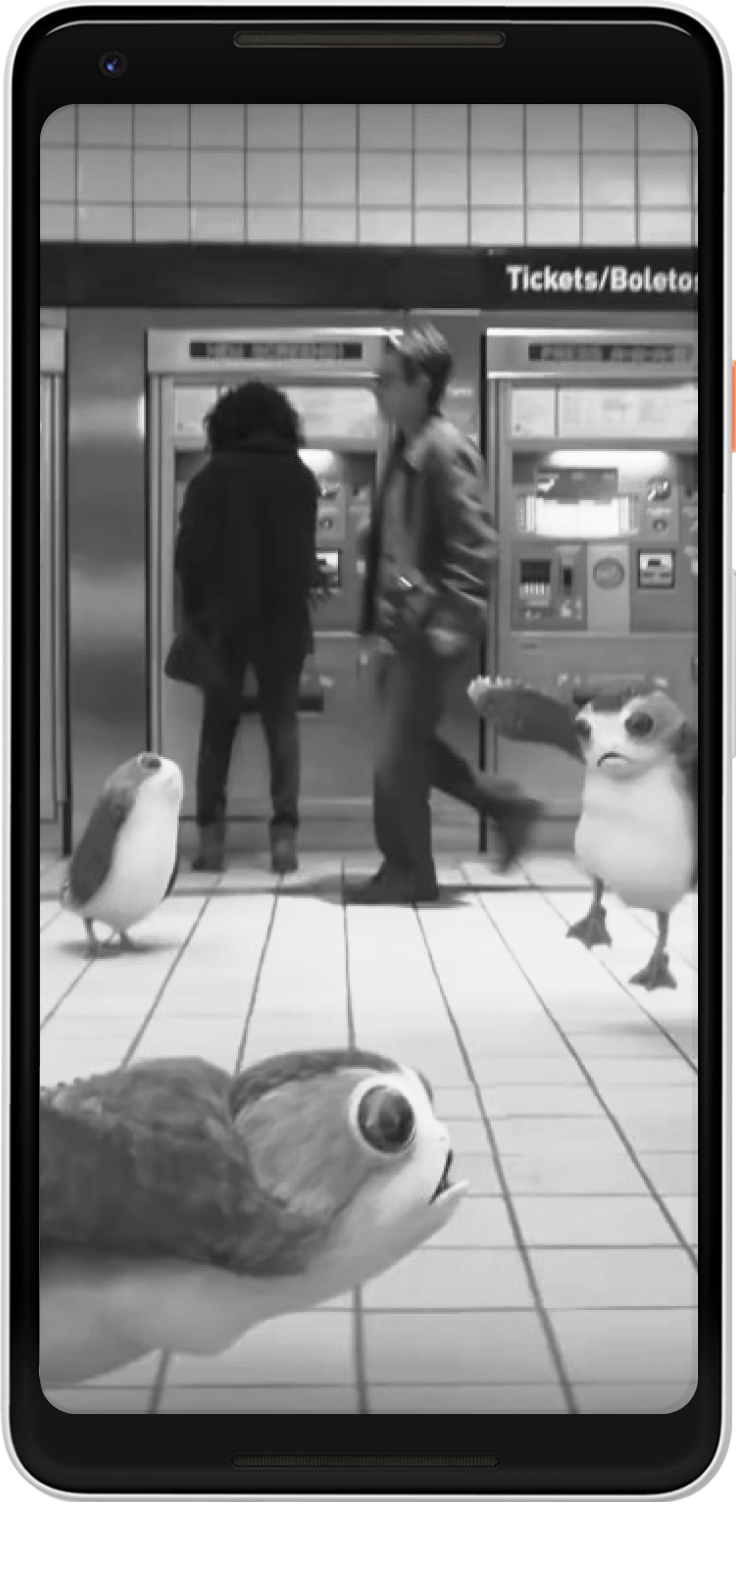 Augmented reality characters flying around a ticket station